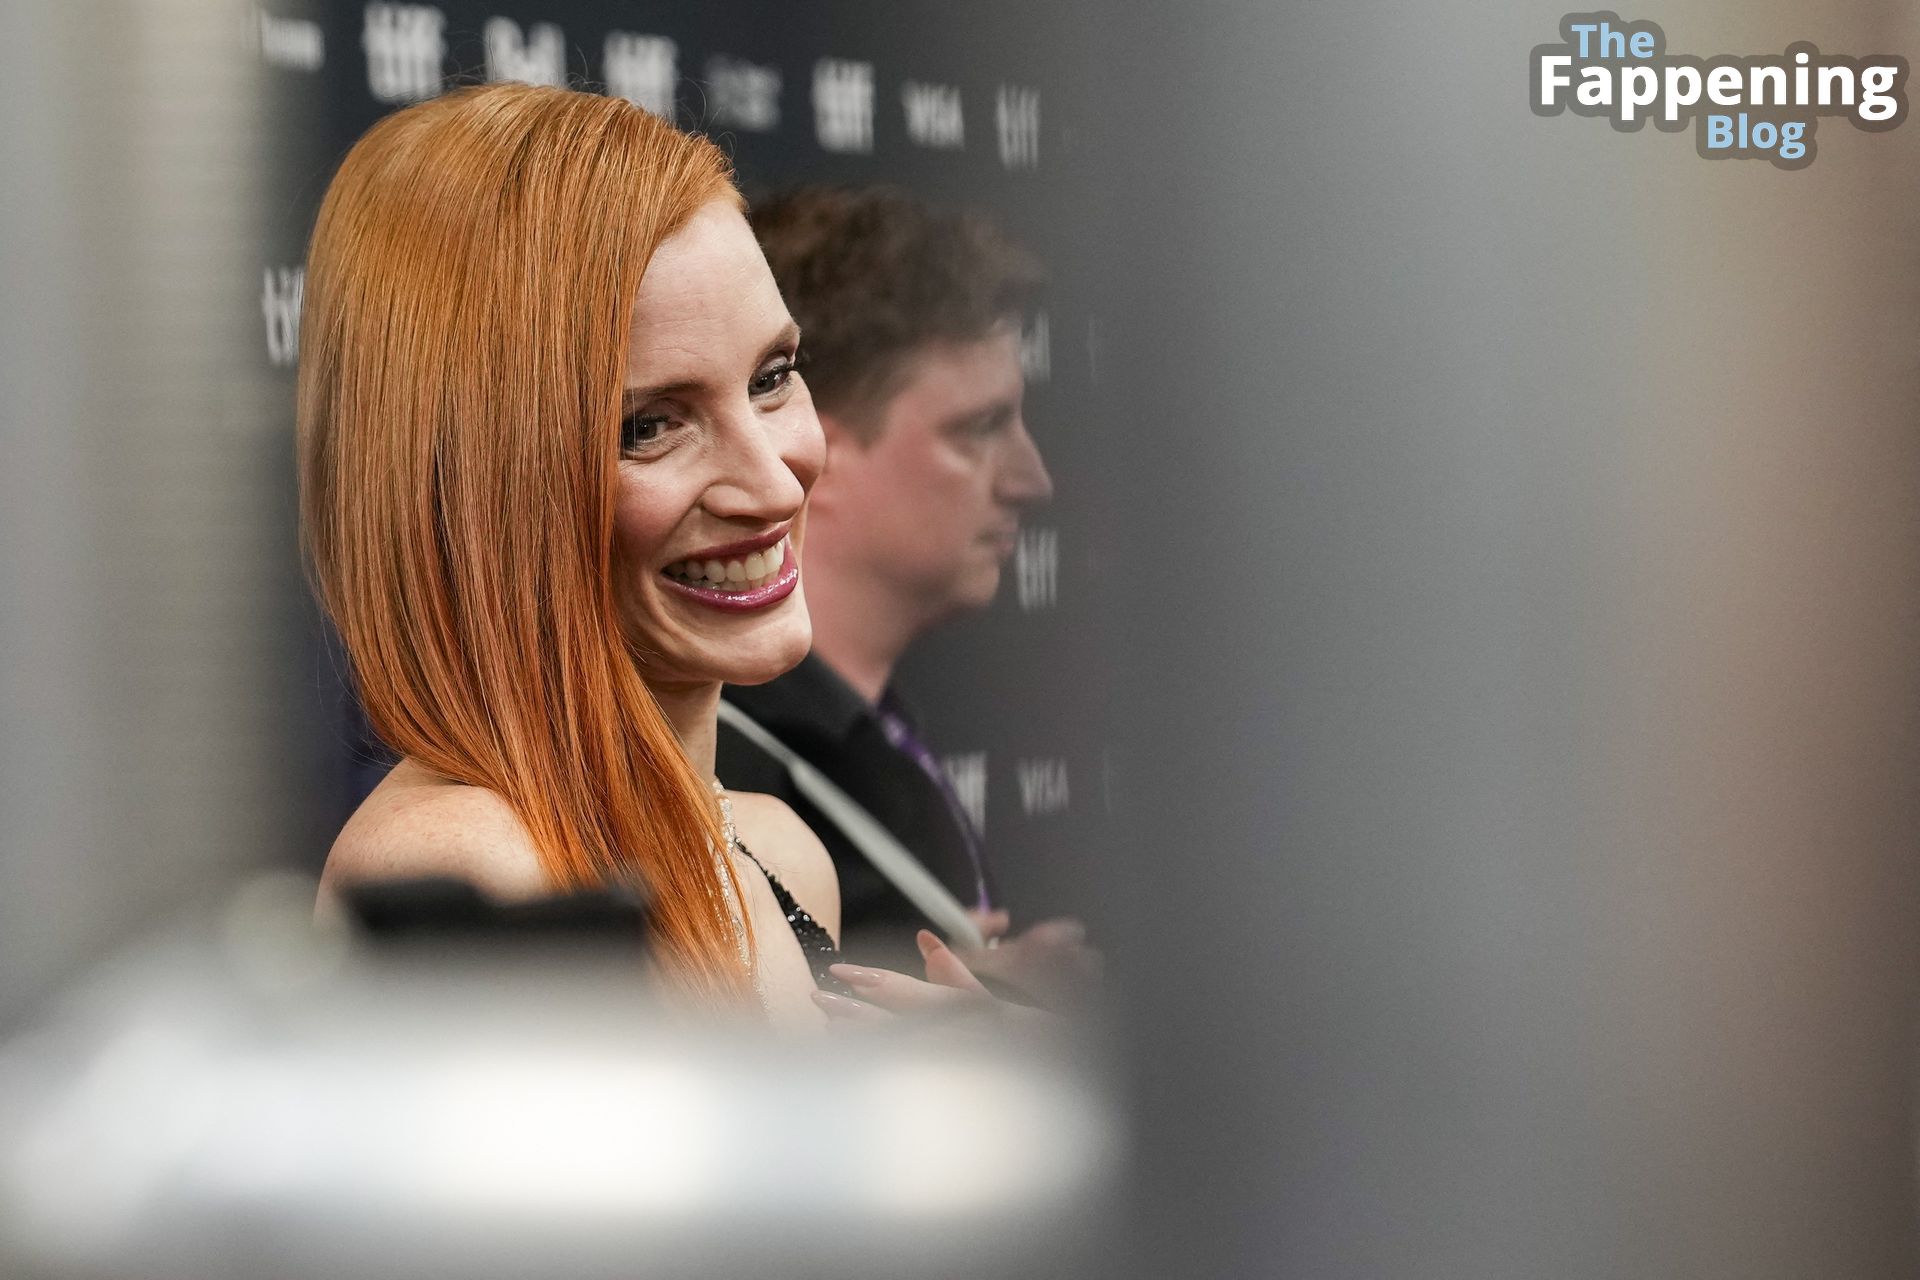 Jessica-Chastain-Sexy-6-The-Fappening-Blog.jpg